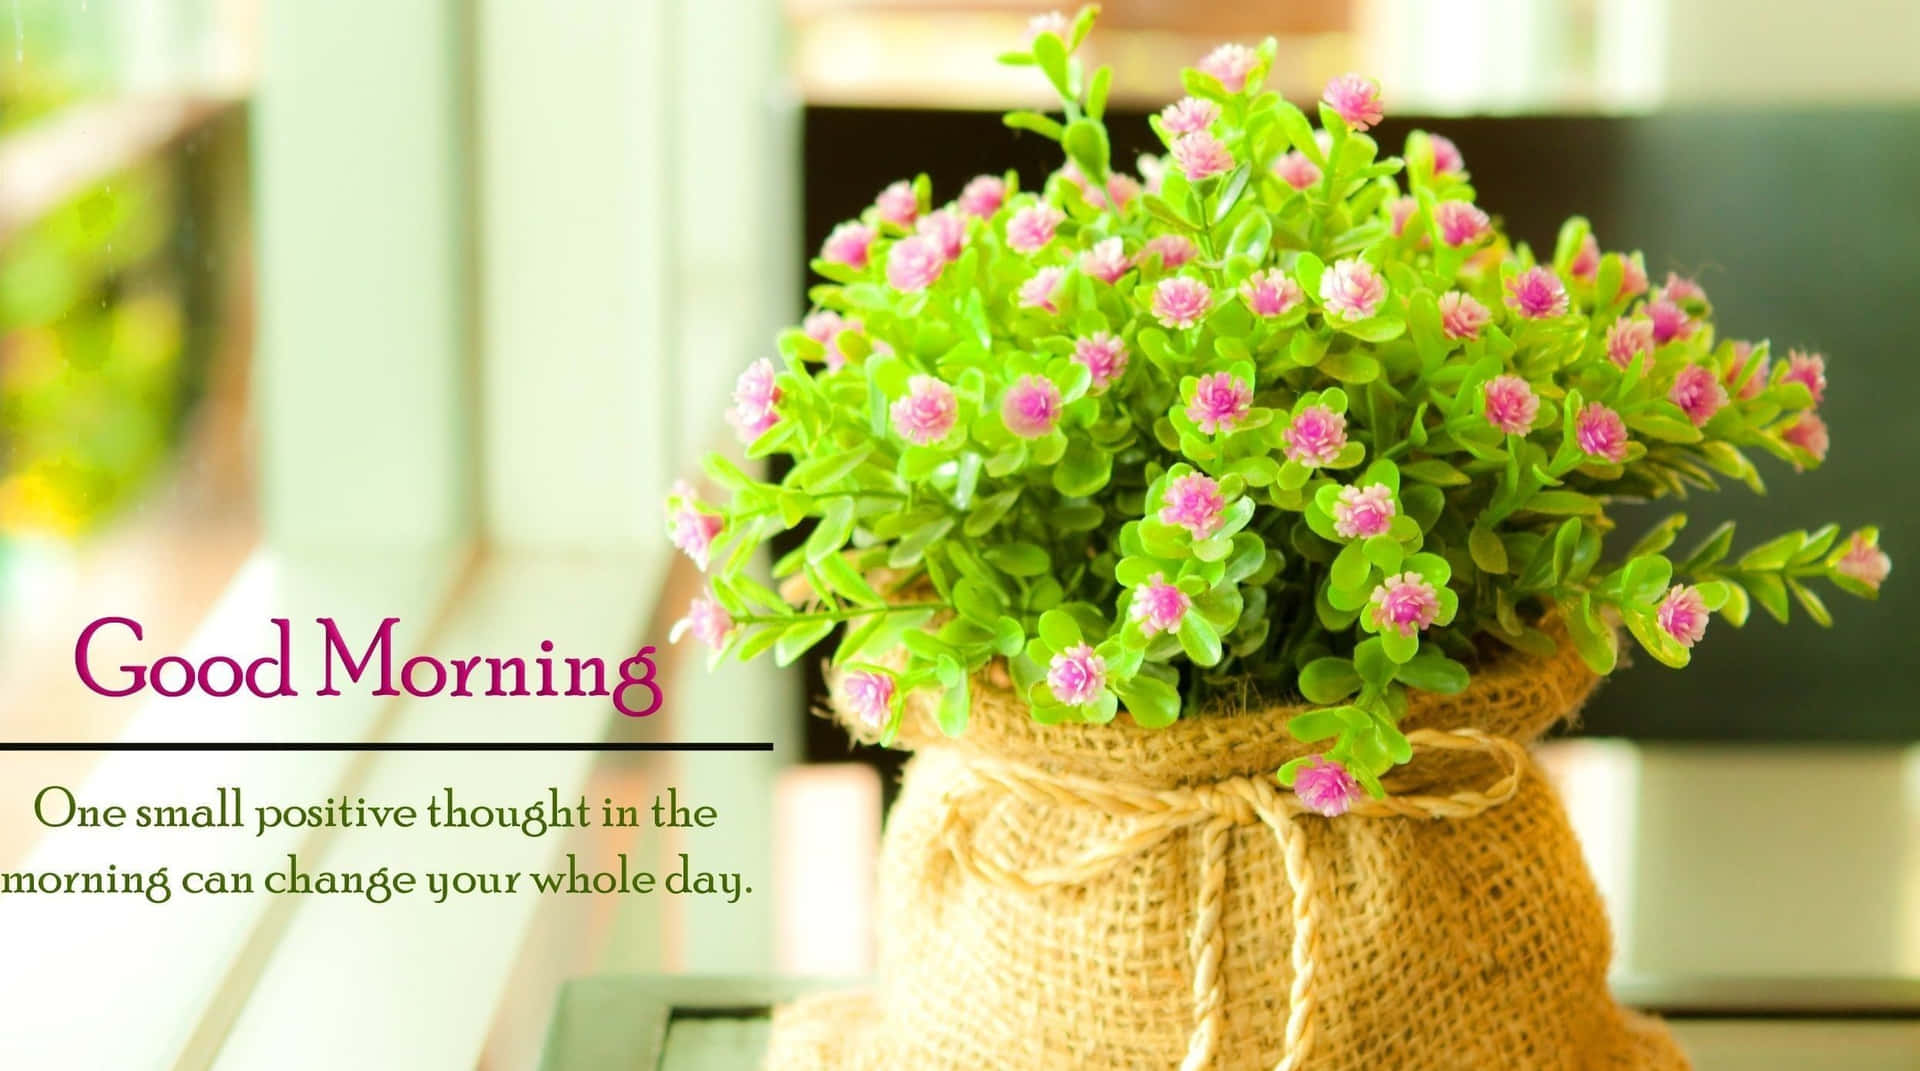 Good Morning Flower Decoration Picture